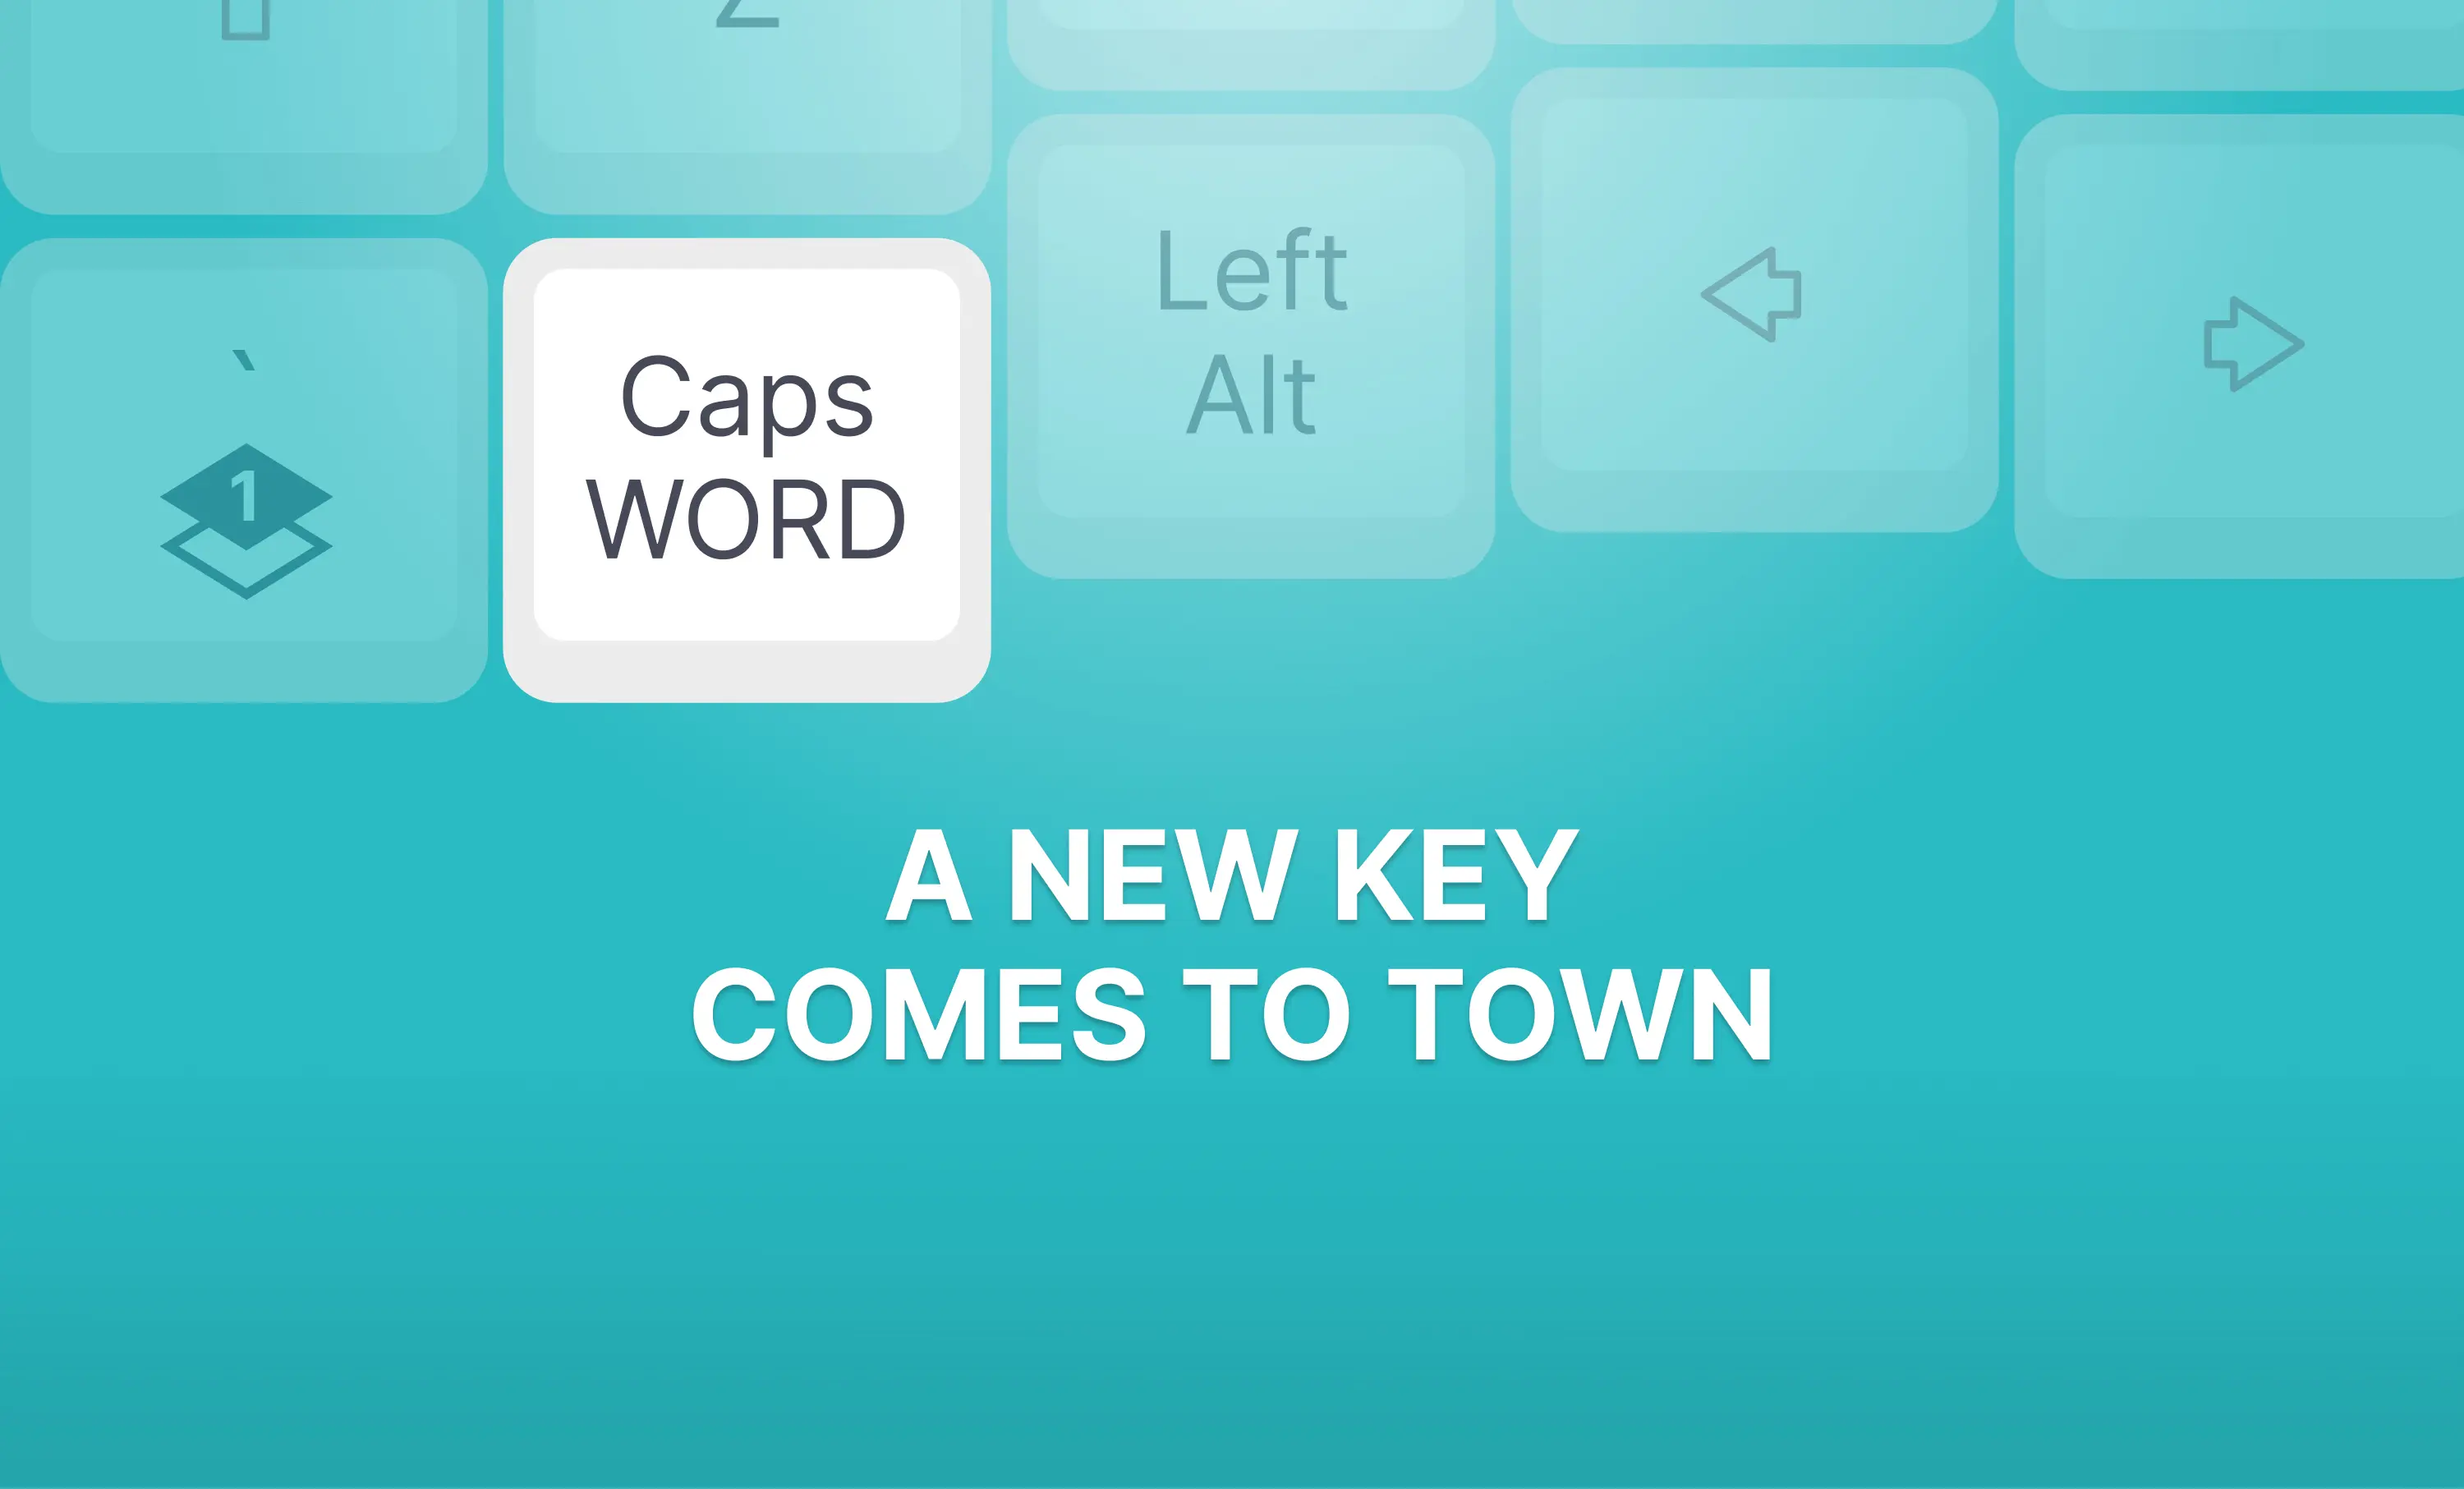 Introducing Caps WORD